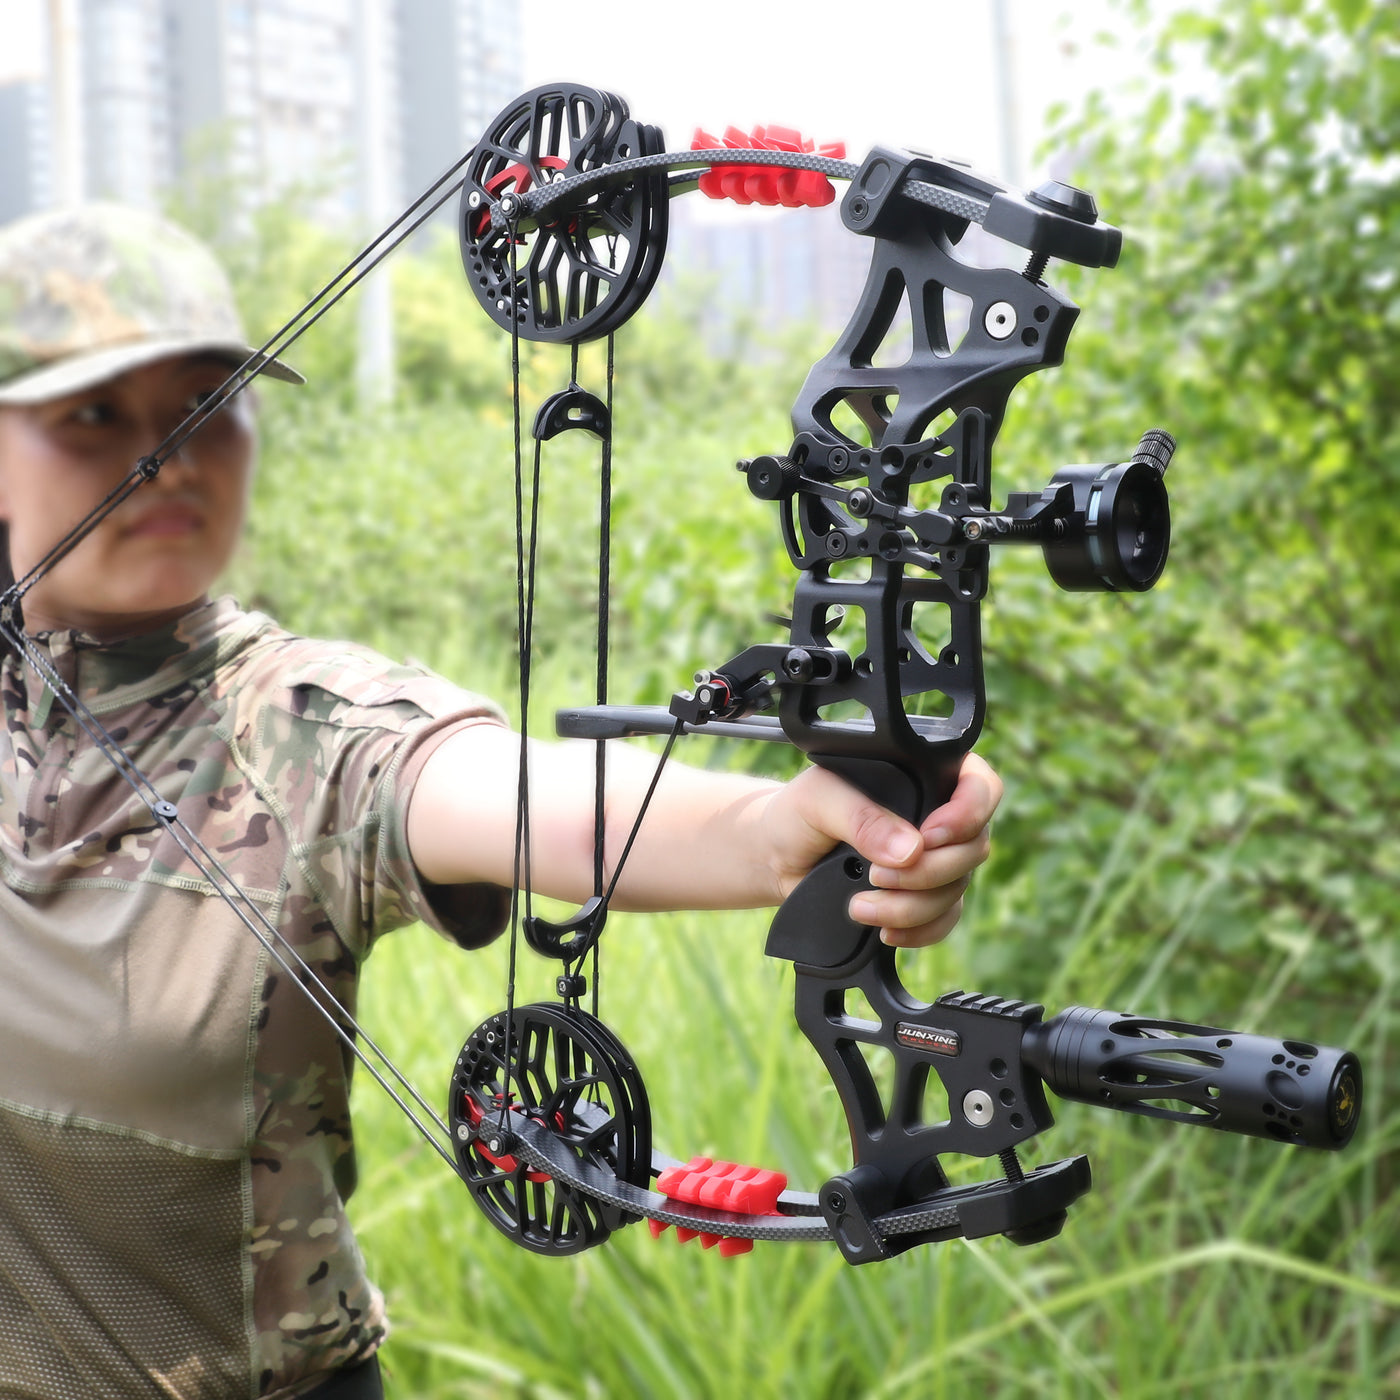 🎯Dual Purpose Compound Bow Kit with 100 Pcs Steel Balls